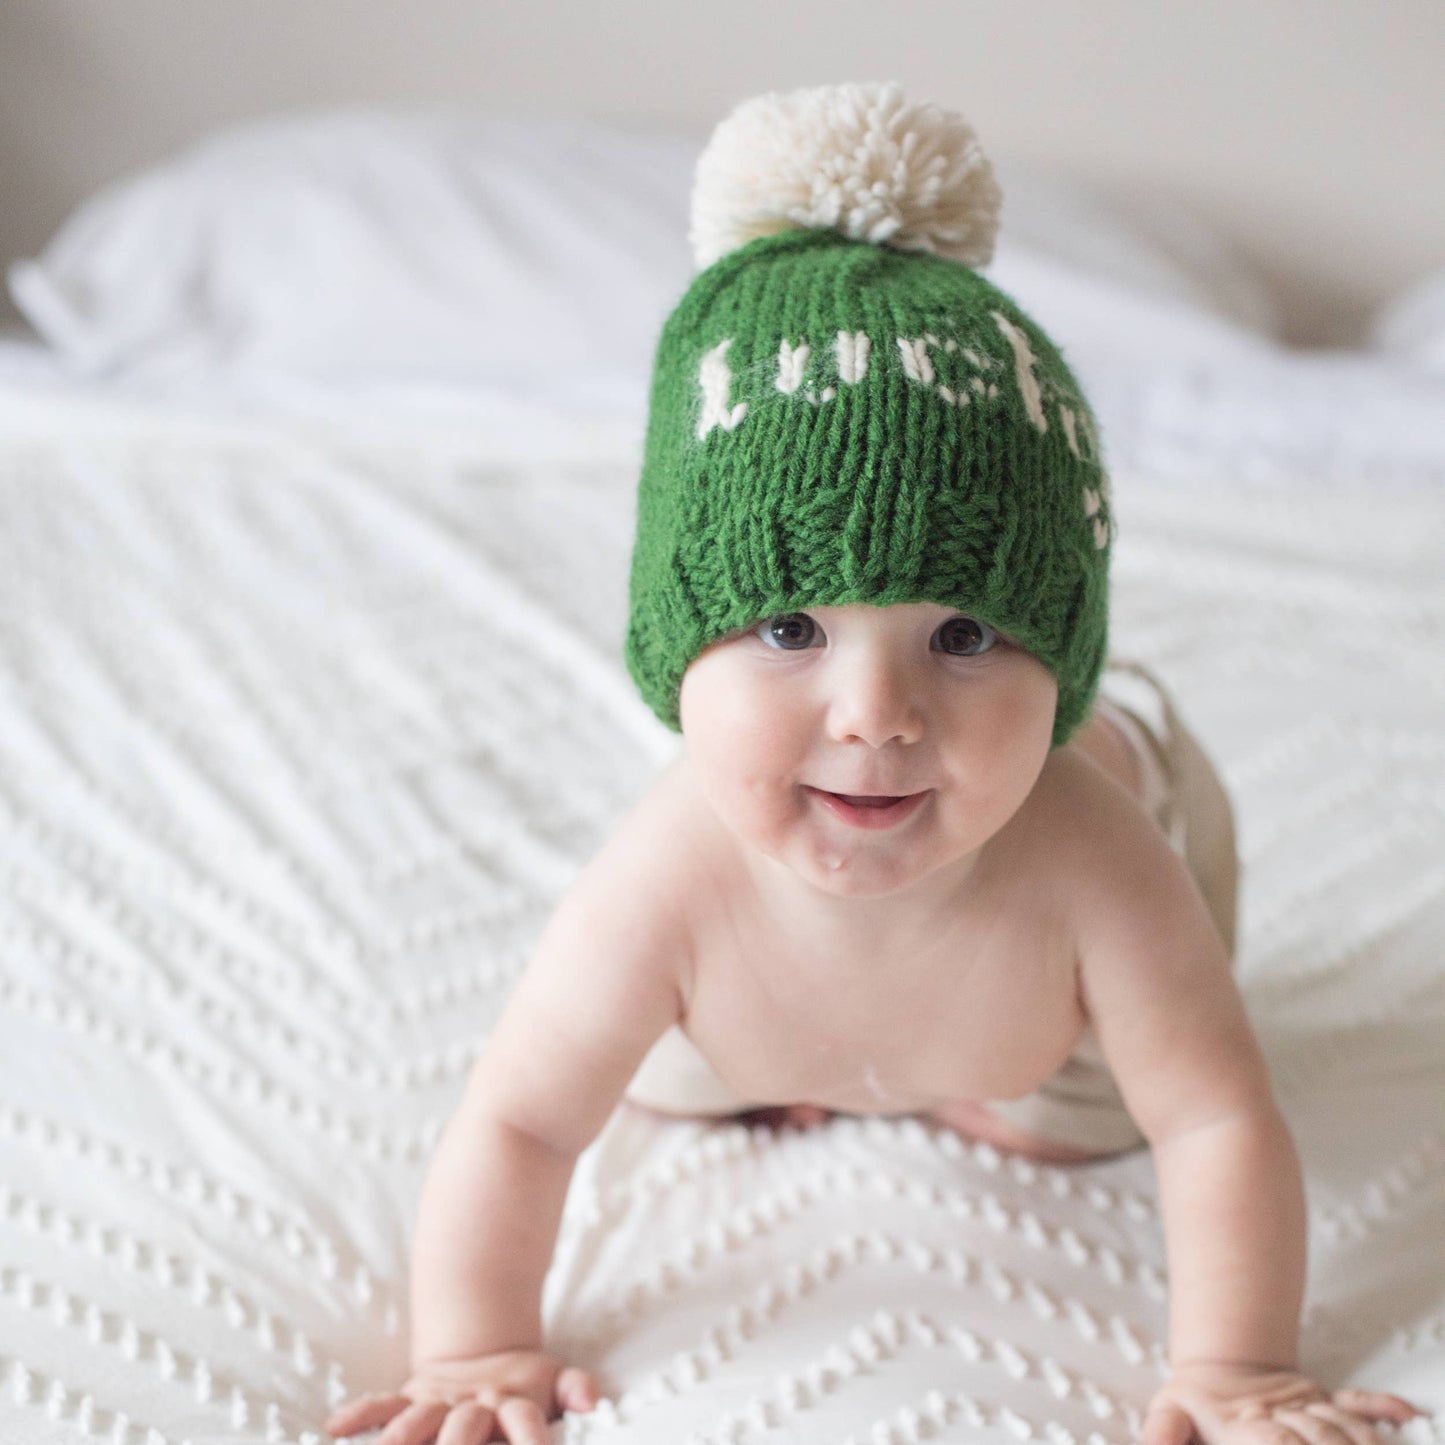 Lucky St. Patrick's Day Hand Knit Beanie